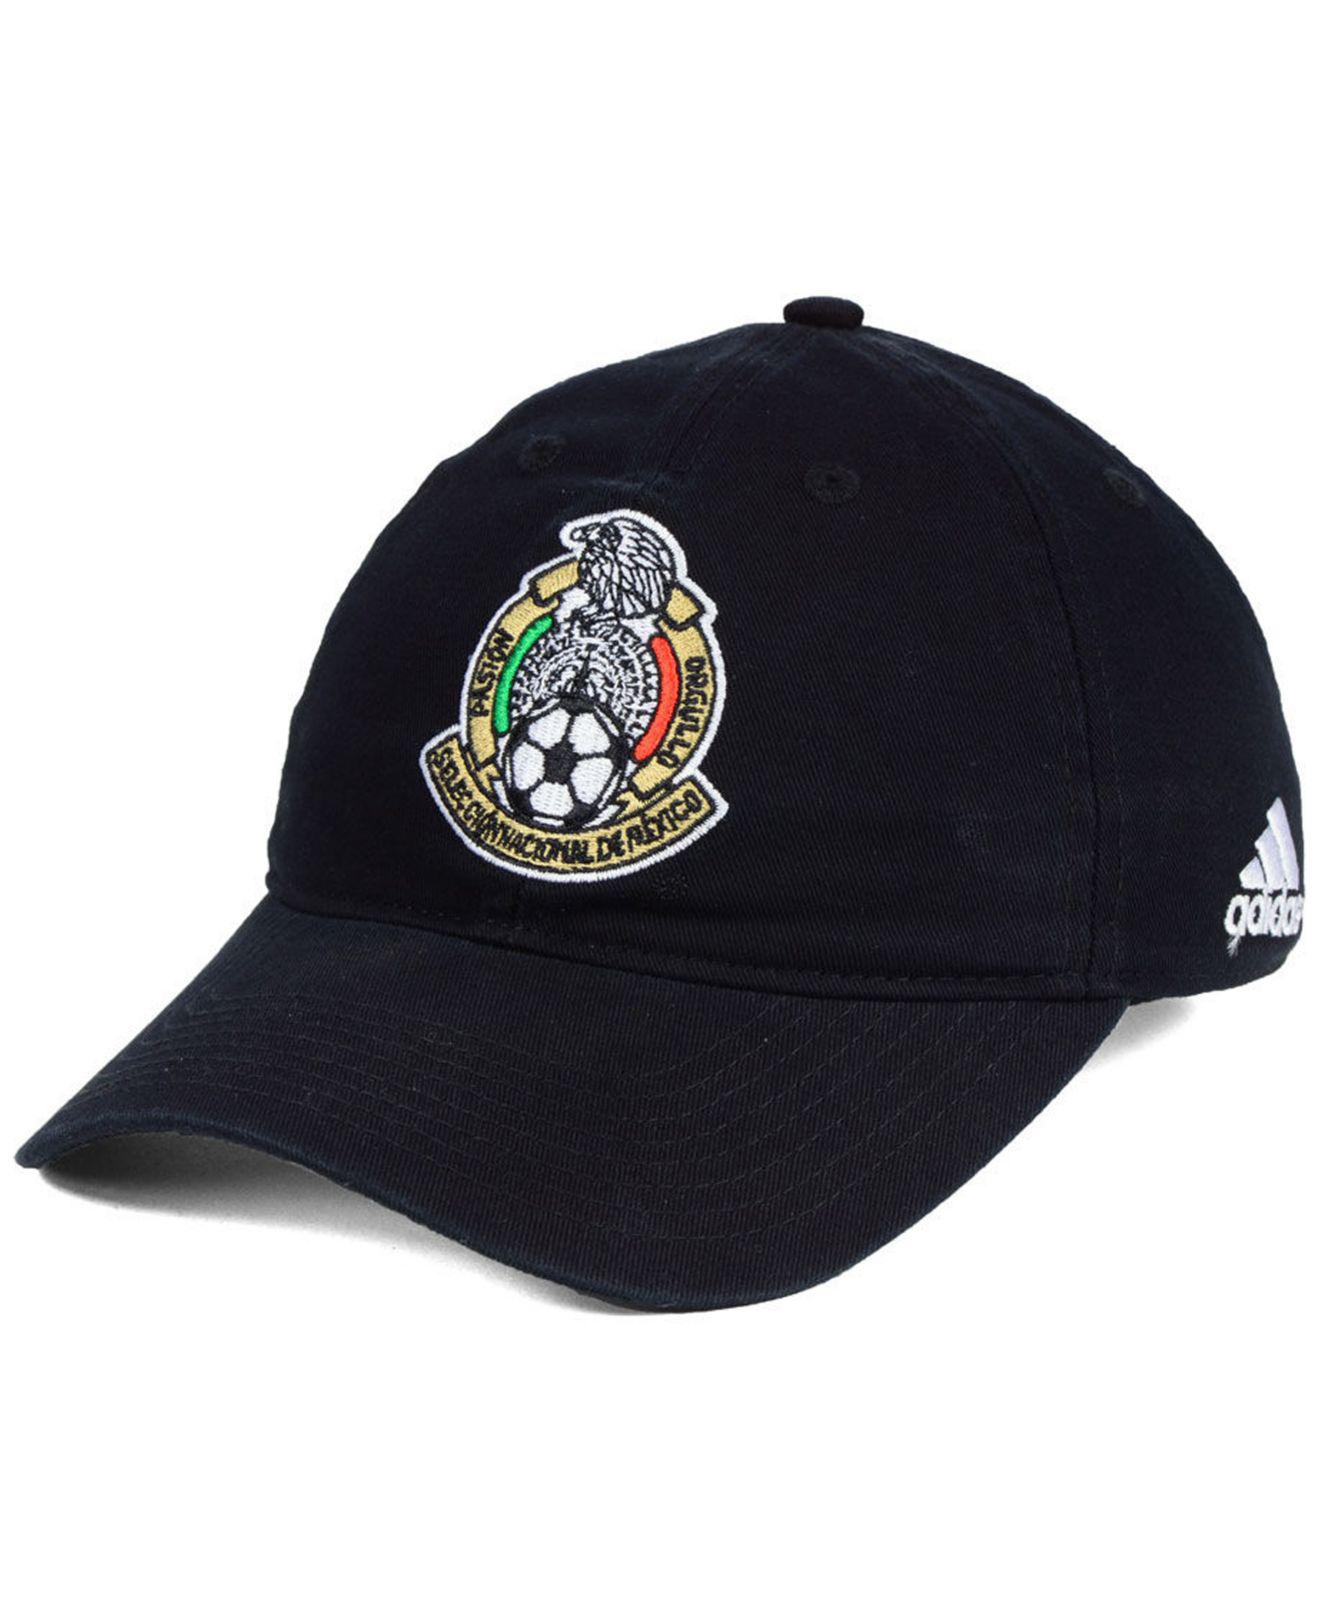 adidas Cotton Mexico World Cup Relaxed Strapback Cap in Black for Men - Lyst